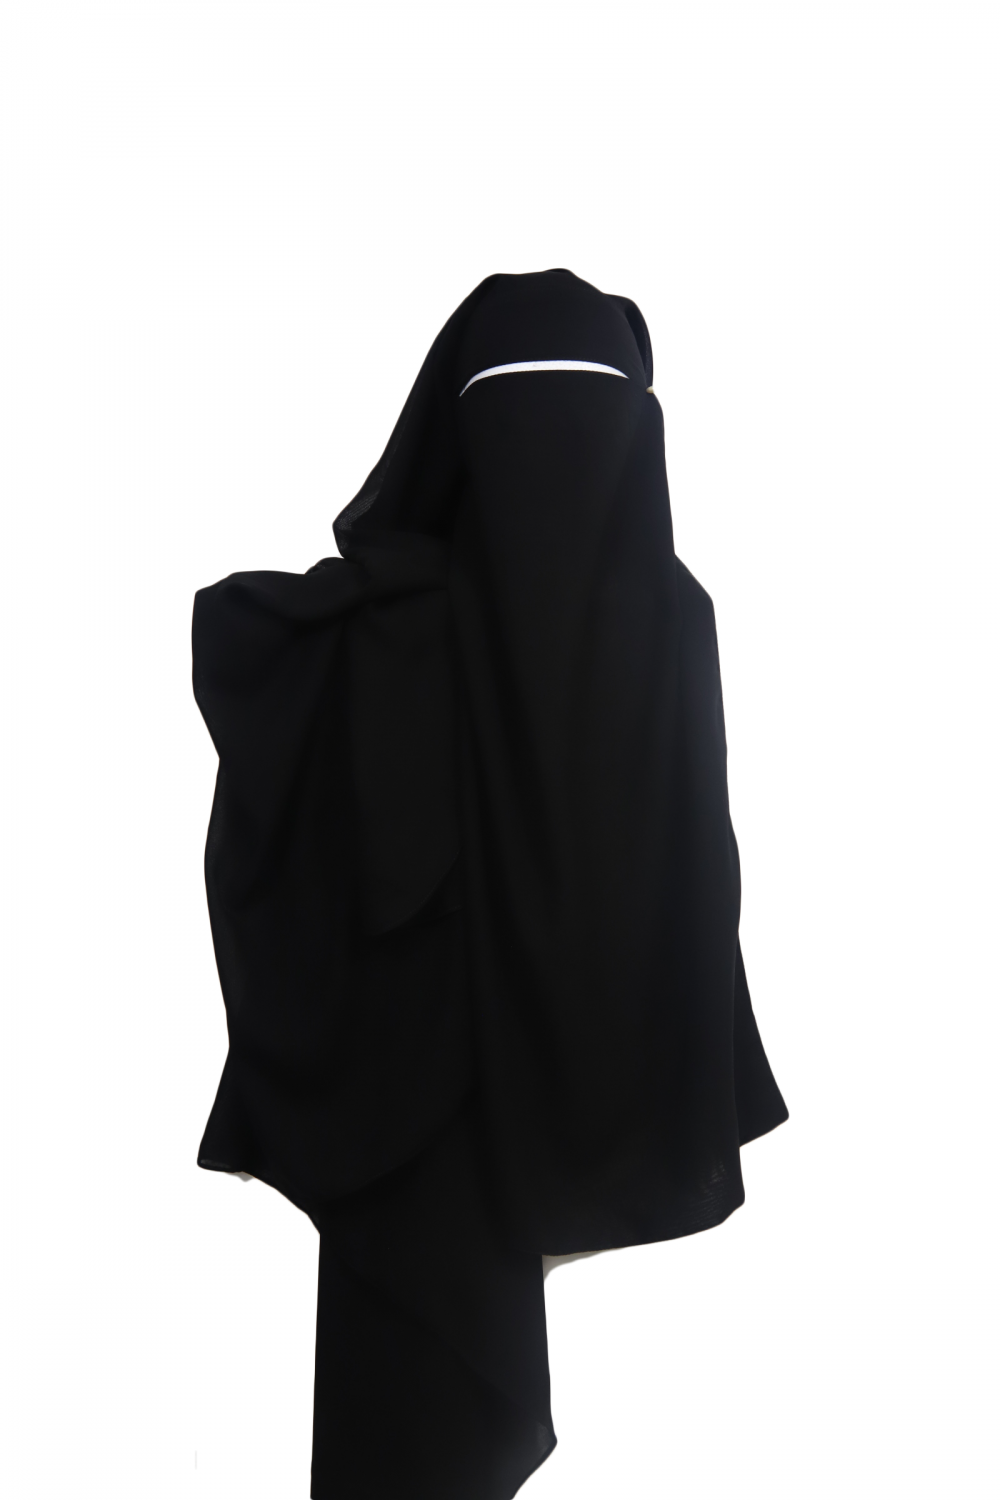 Buy niqabs online in many different colors and styles.